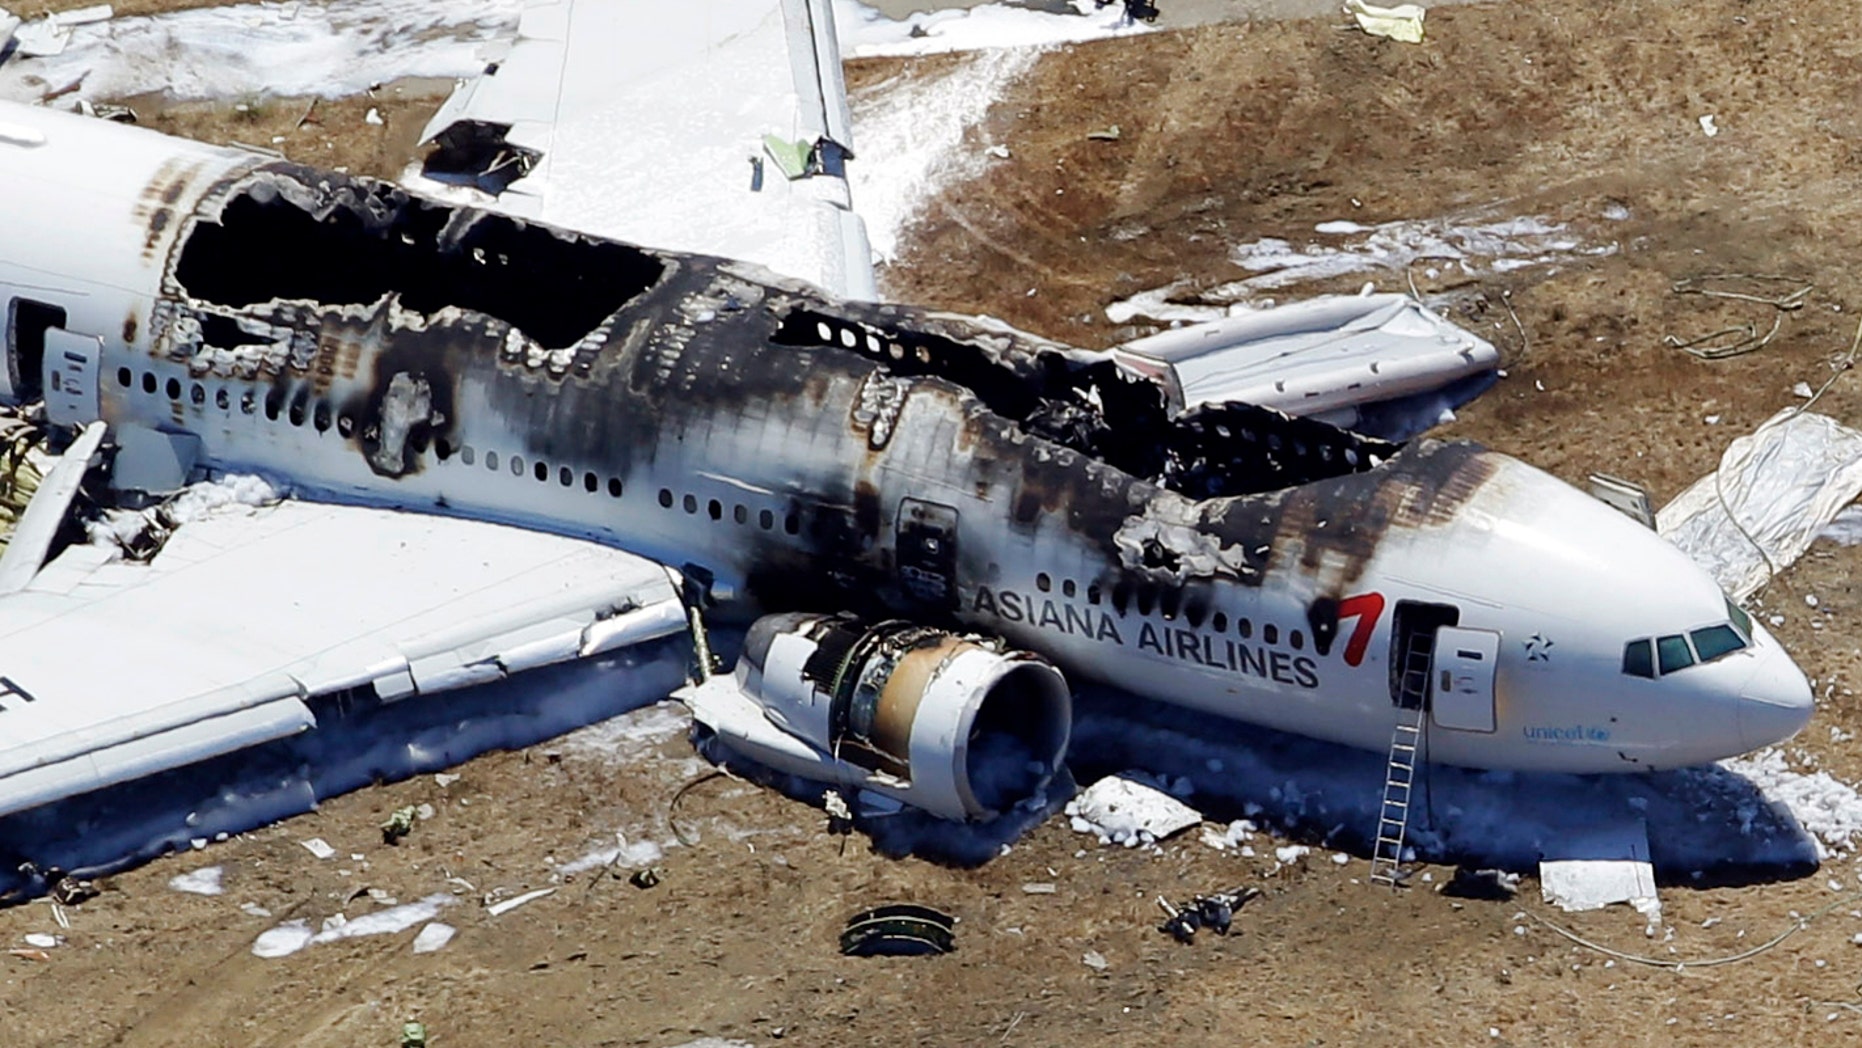 Asiana Airlines Deadly Flight 214 Kills Two And Injures Over 180 More